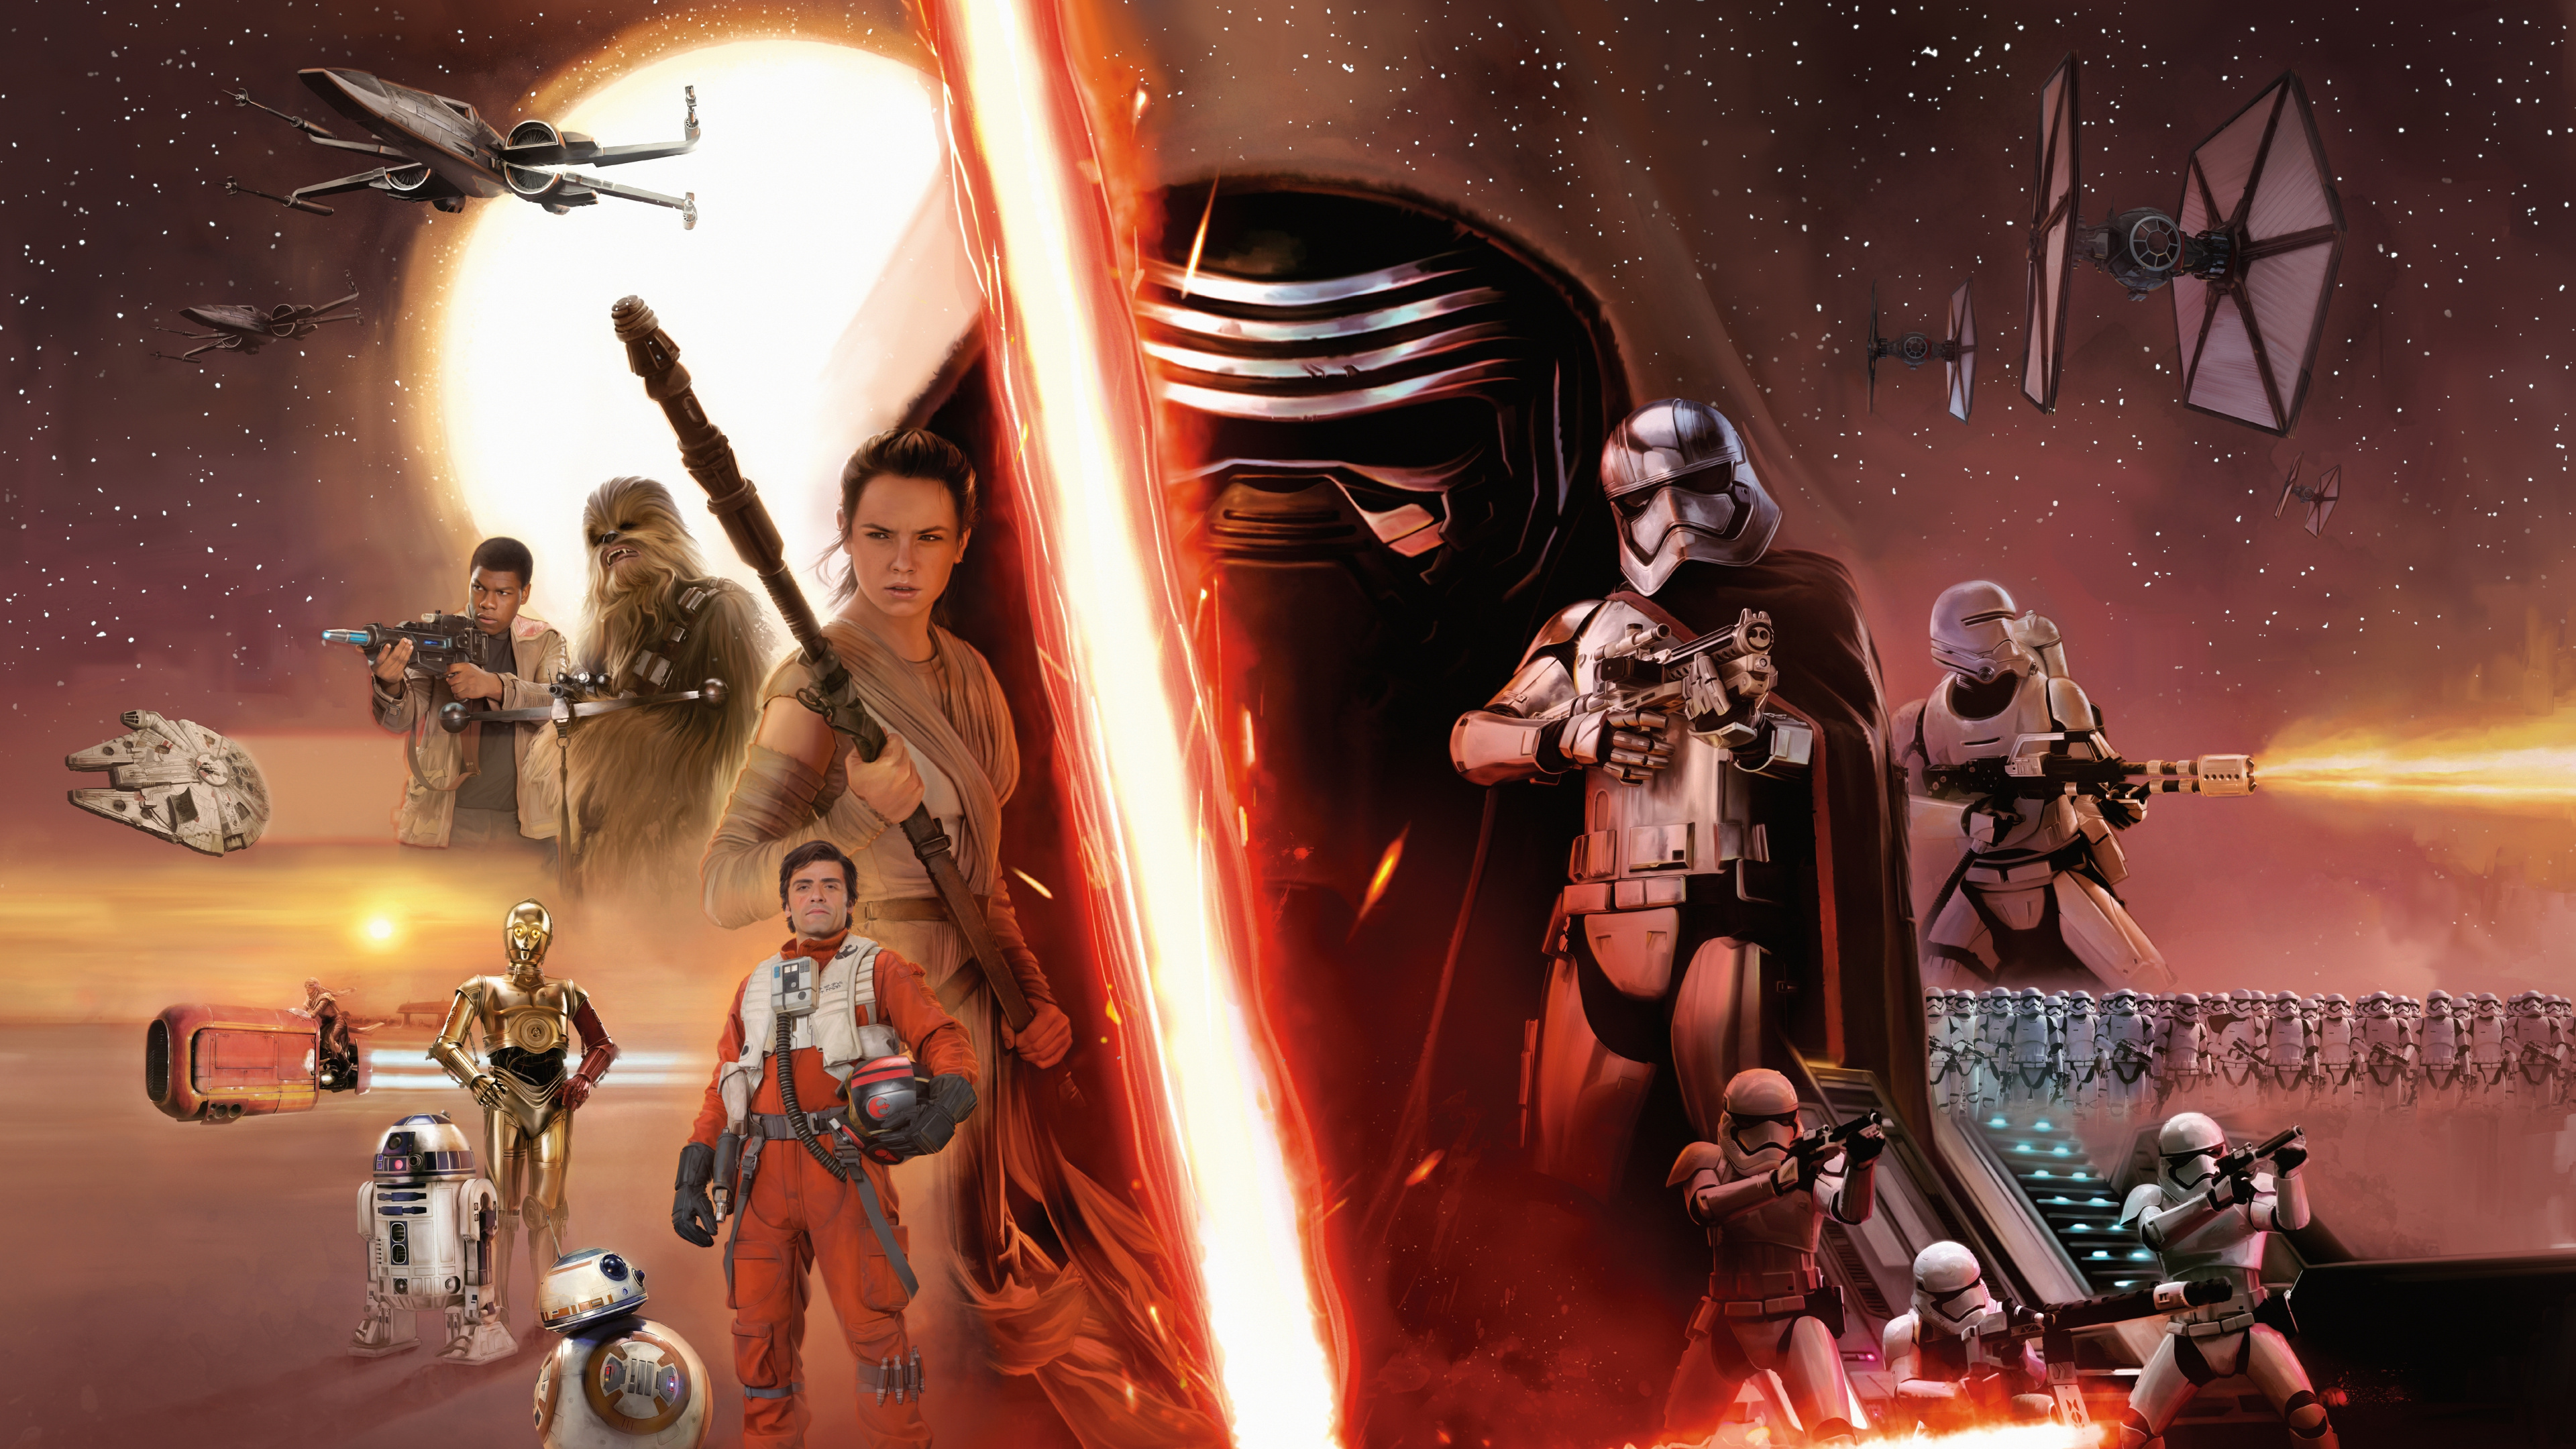 Star Wars The Force Awakens, Star Wars, Action Figure, Lucasfilm, Space. Wallpaper in 3840x2160 Resolution